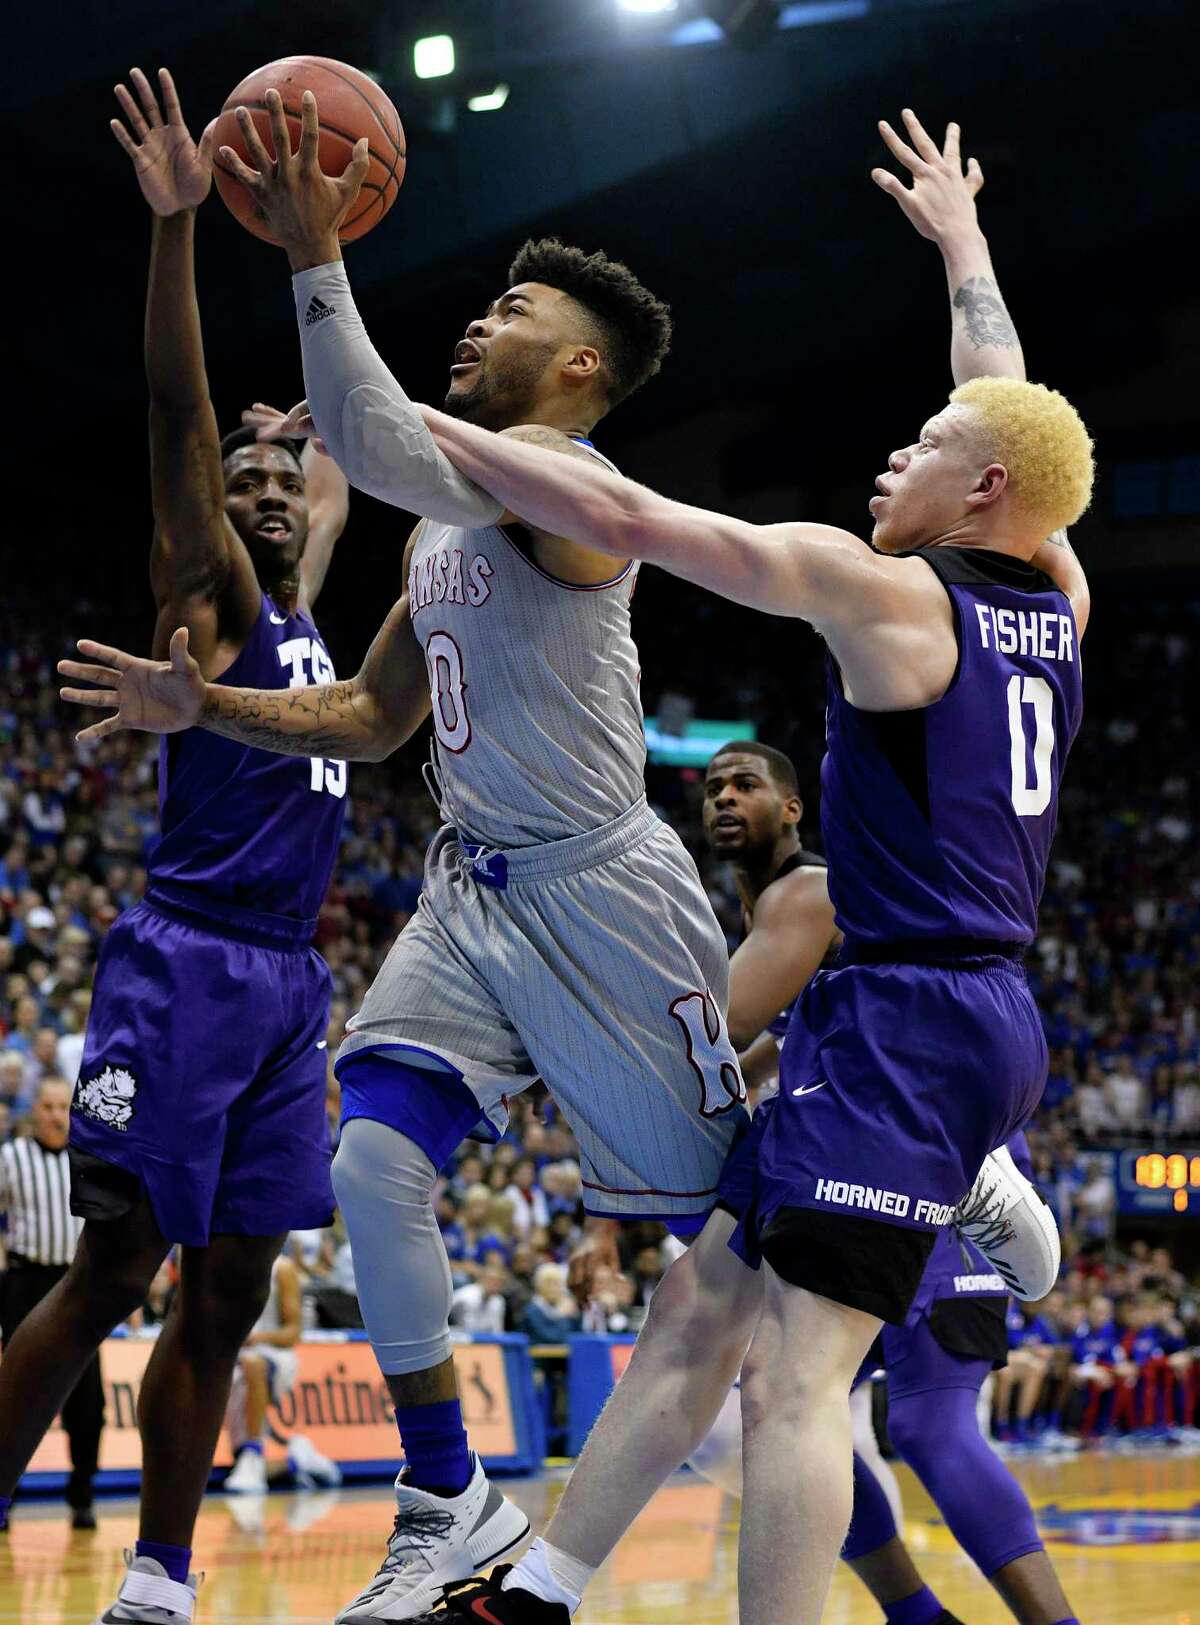 LAWRENCE, KS - FEBRUARY 22: Frank Mason III #0 of the Kansas Jayhawks lays the ball up against JD Miller #15 and Jaylen Fisher #0 of the TCU Horned Frogs in the first half at Allen Fieldhouse on February 22, 2017 in Lawrence, Kansas. (Photo by Ed Zurga/Getty Images) ORG XMIT: 669708613